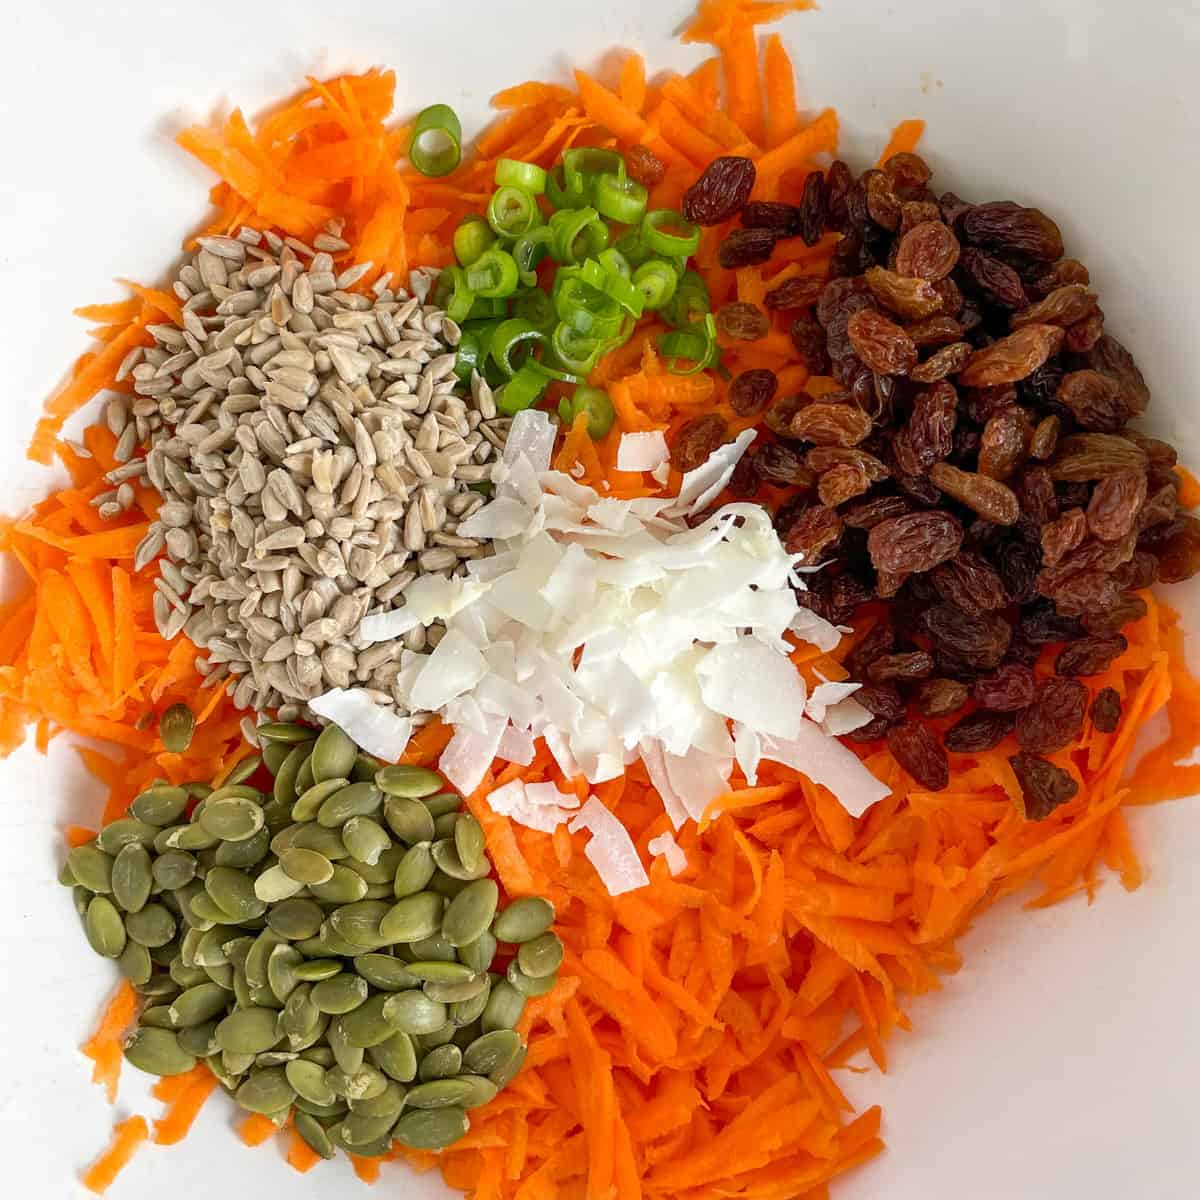 How to Make Carrot Salad 